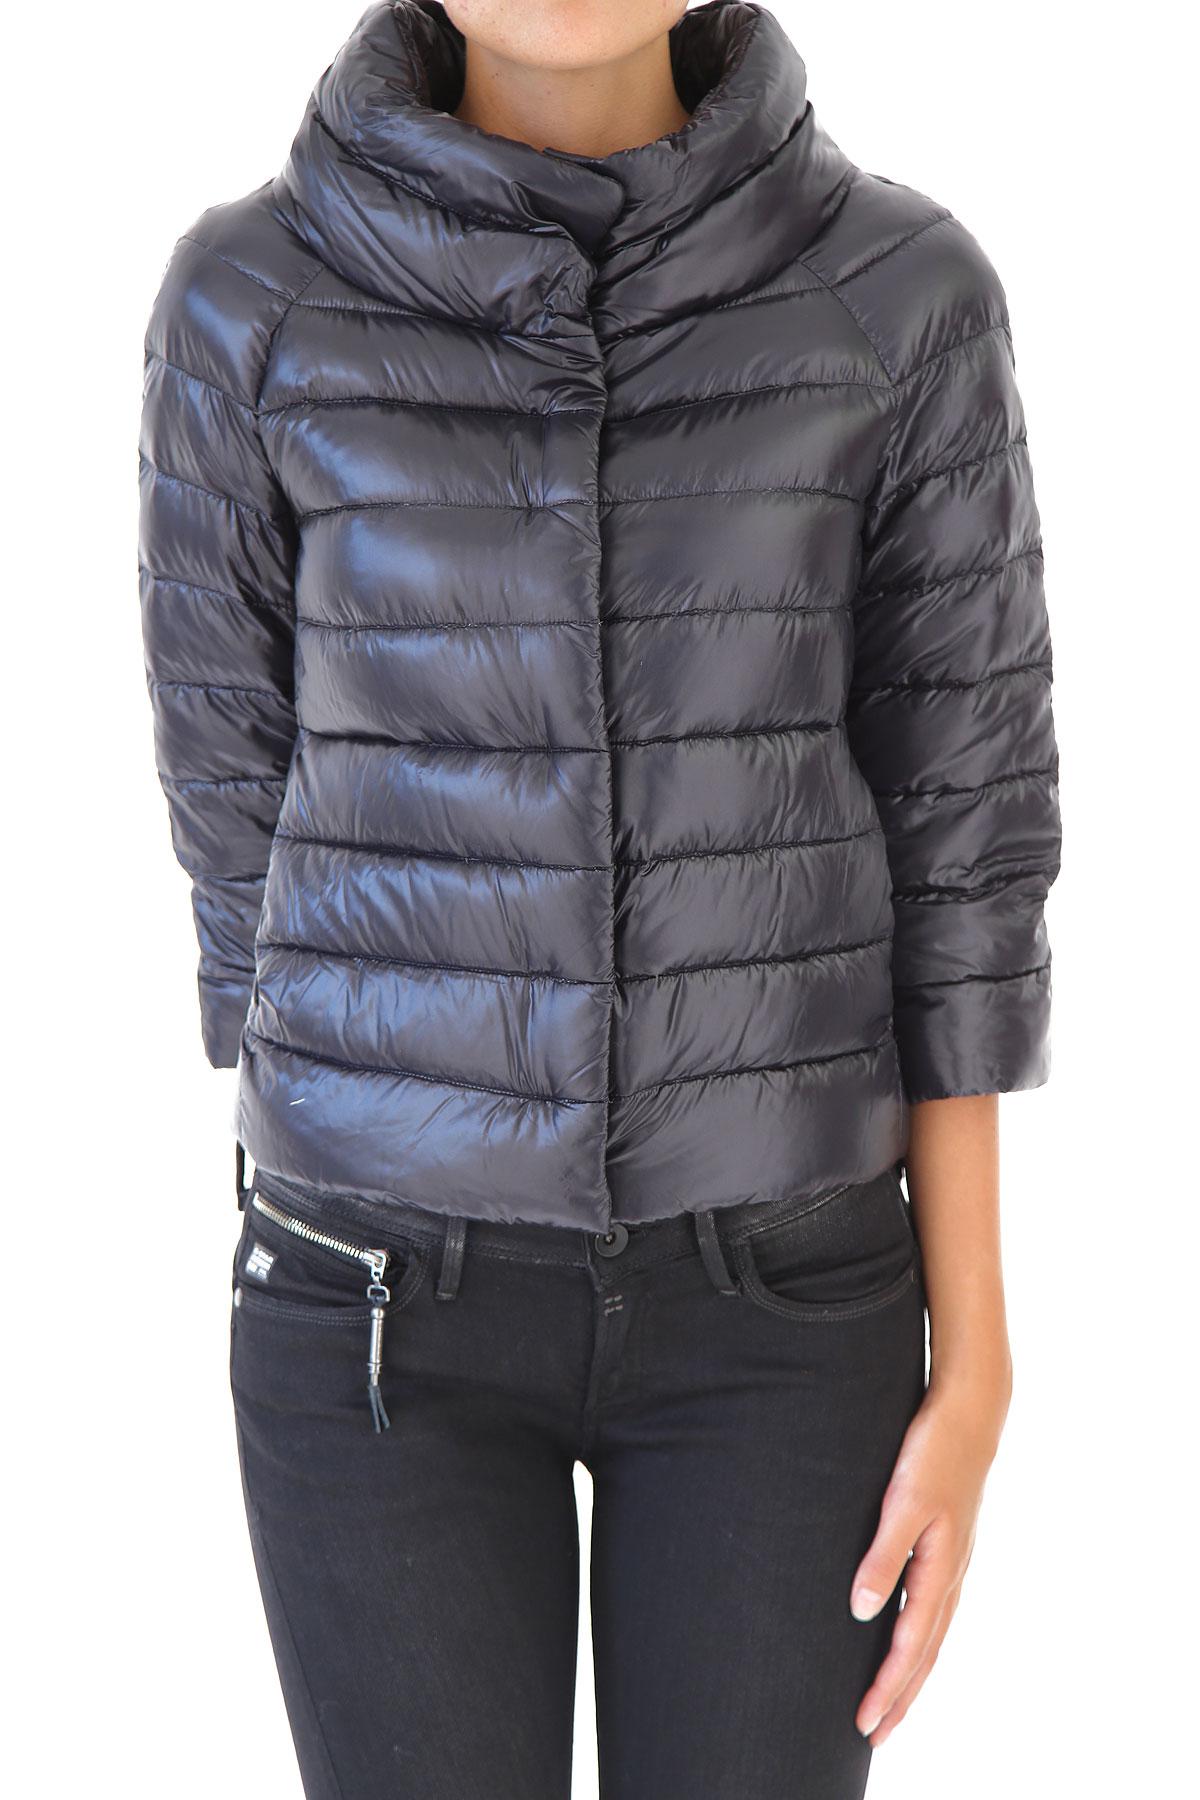 Herno Down Jacket For Women in Black - Lyst